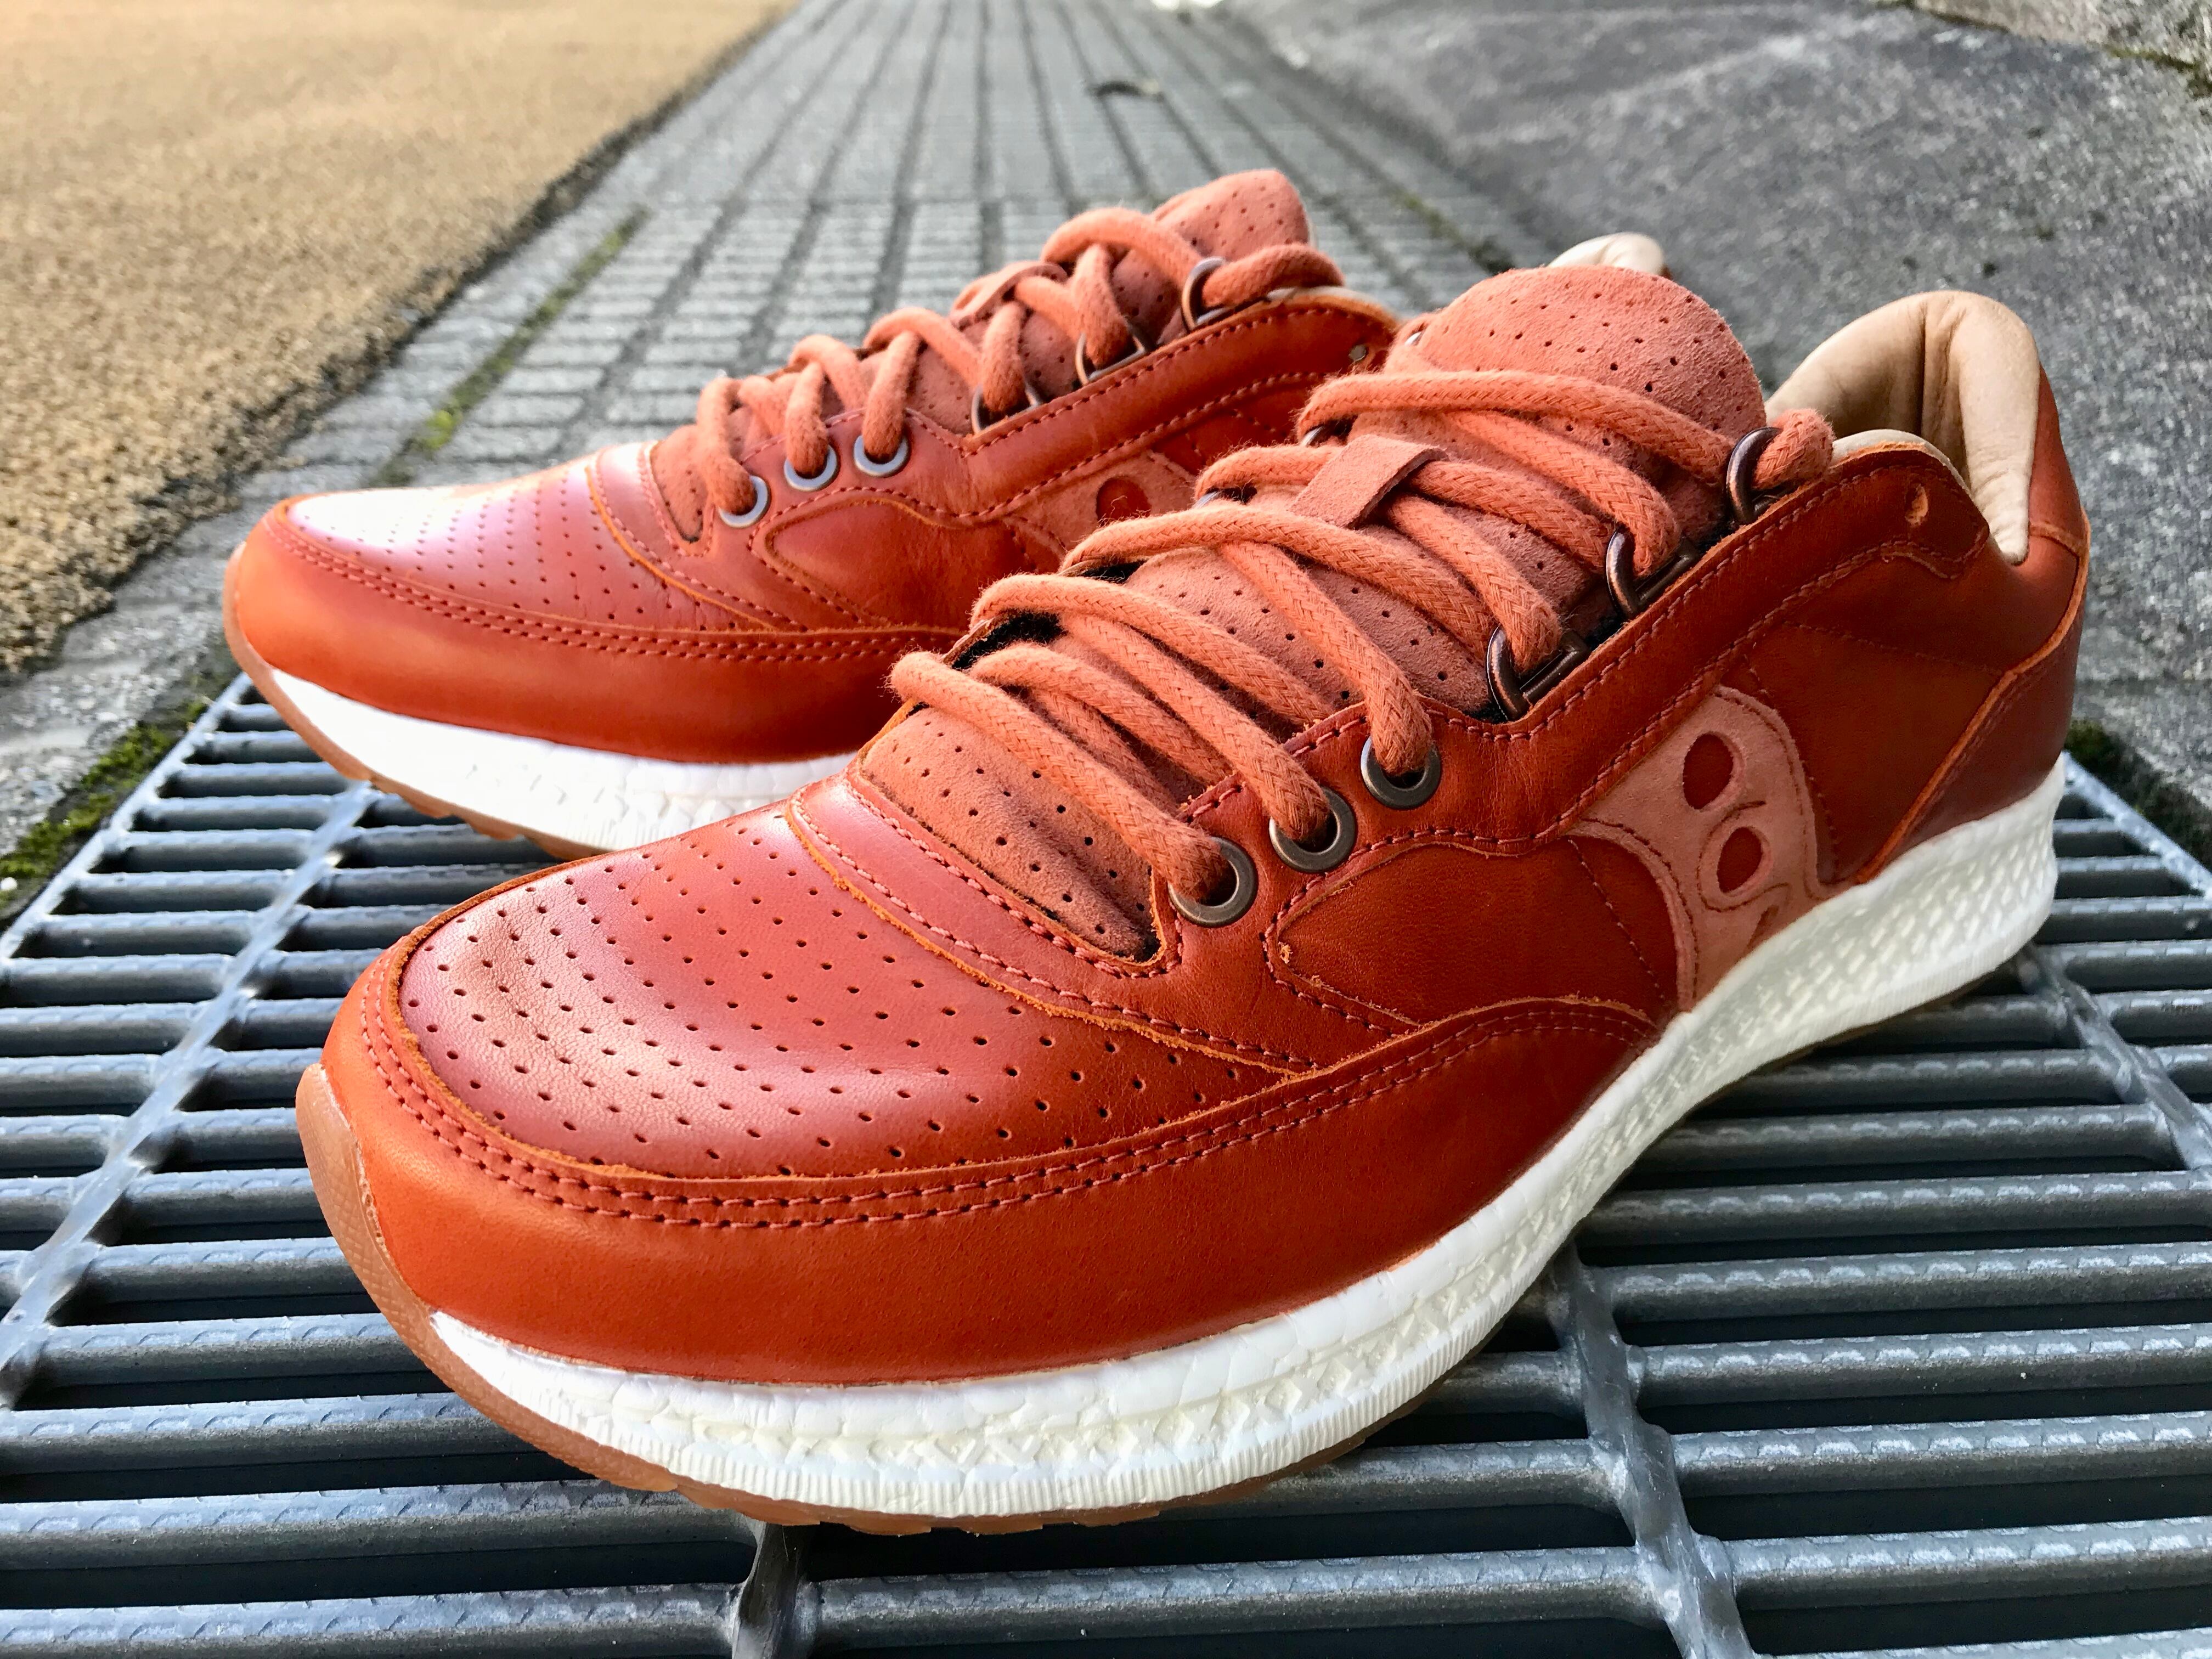 SAUCONY FREEDOM RUNNER (BROWN/TAN) | "JACK OF ALL TRADES" 万屋 MARU